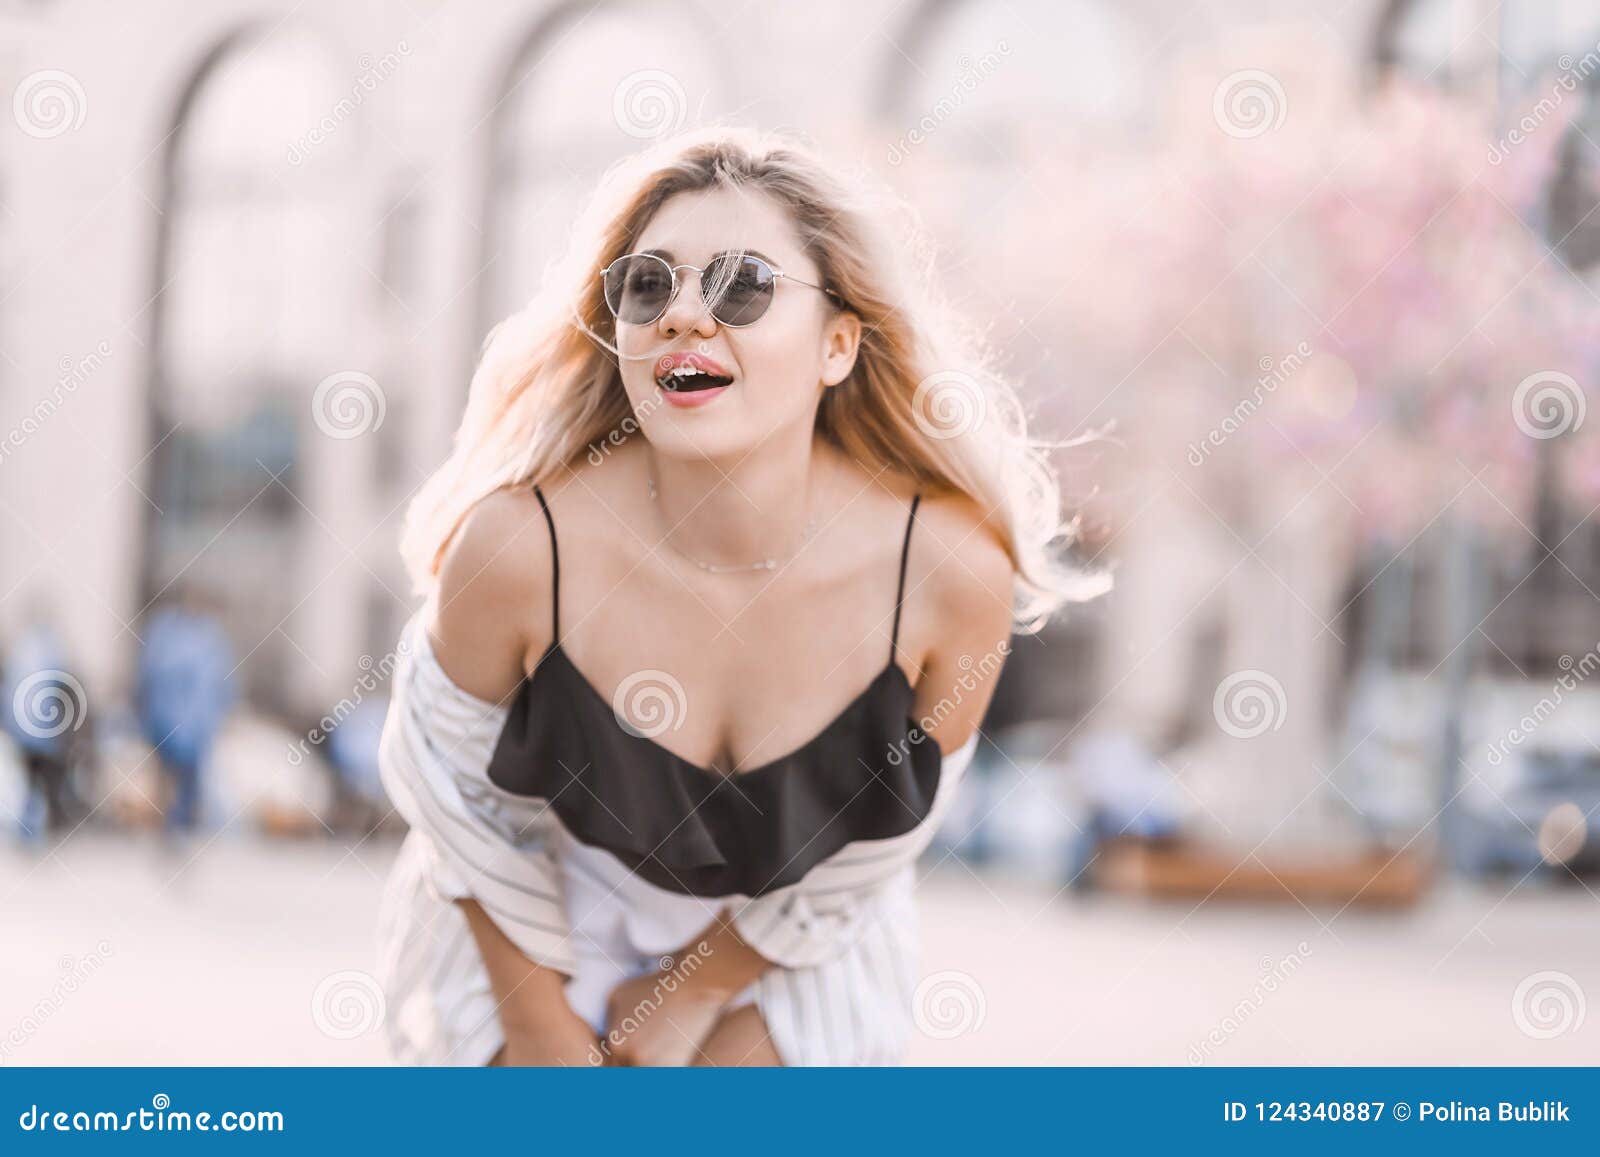 Beautiful Young Blonde Girl In Sunglasses With Puffy Lips And Feminine 